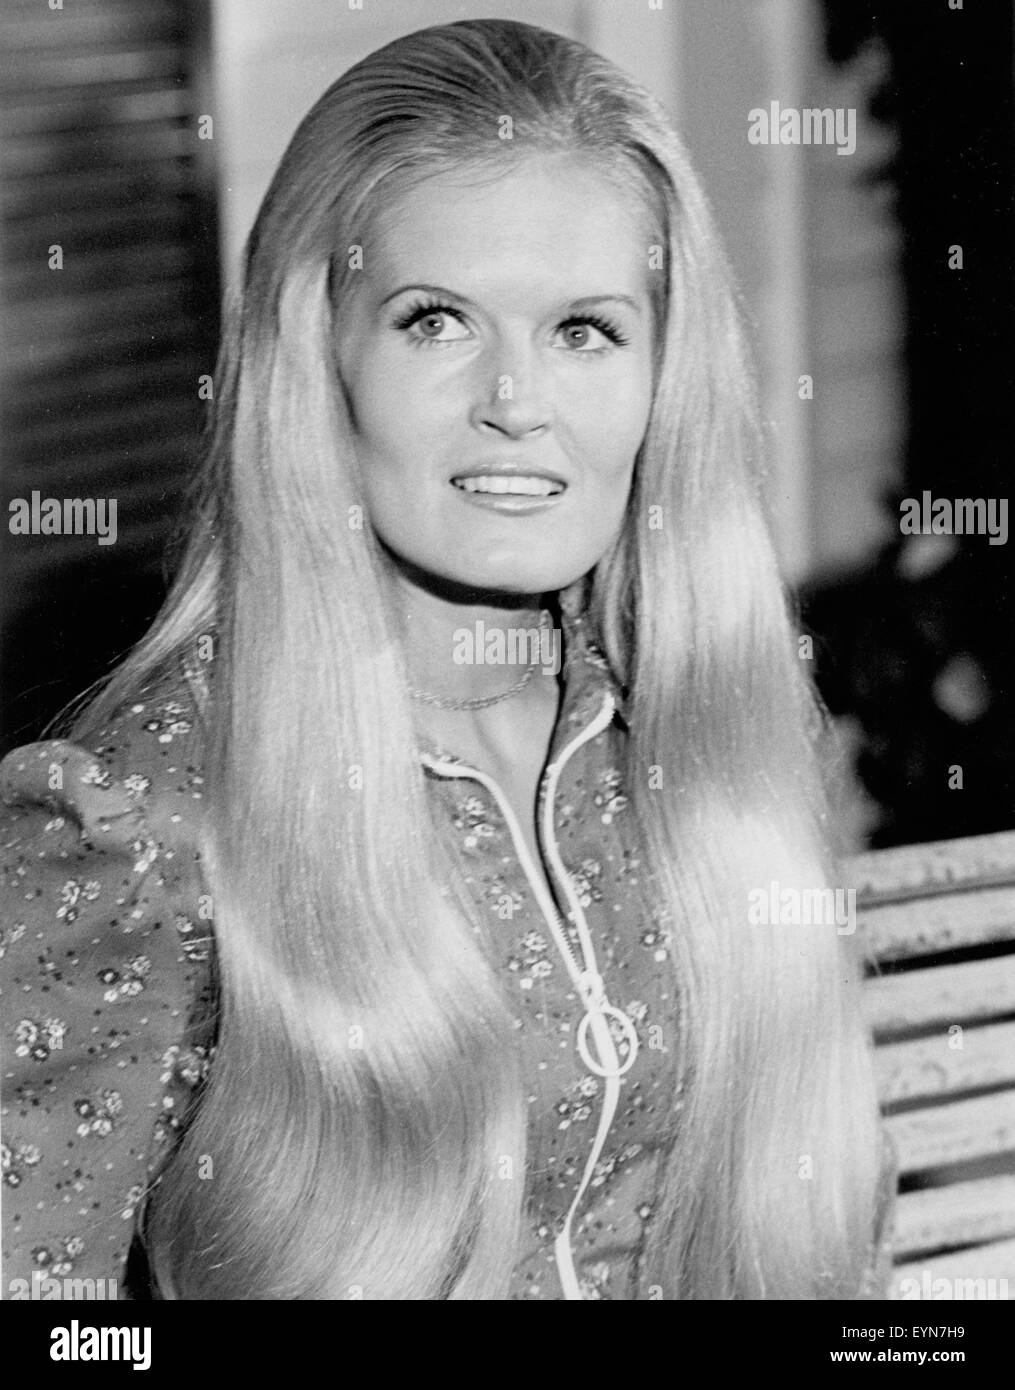 File. 1st Aug, 2015. US country singer LYNN ANDERSON (September 26, 1947 - July 31, 2015) best known for her worldwide 1971 hit (I Never Promised You a) Rose Garden, has died, aged 67. She had been in hospital in Nashville, where she suffered a heart attack on Thursday. Other US hits included You're My Man, How Can I Unlove You? and Top of the World. Pictured: c. 1970's - Lynn Anderson. © Globe Photos/ZUMAPRESS.com/Alamy Live News Stock Photo